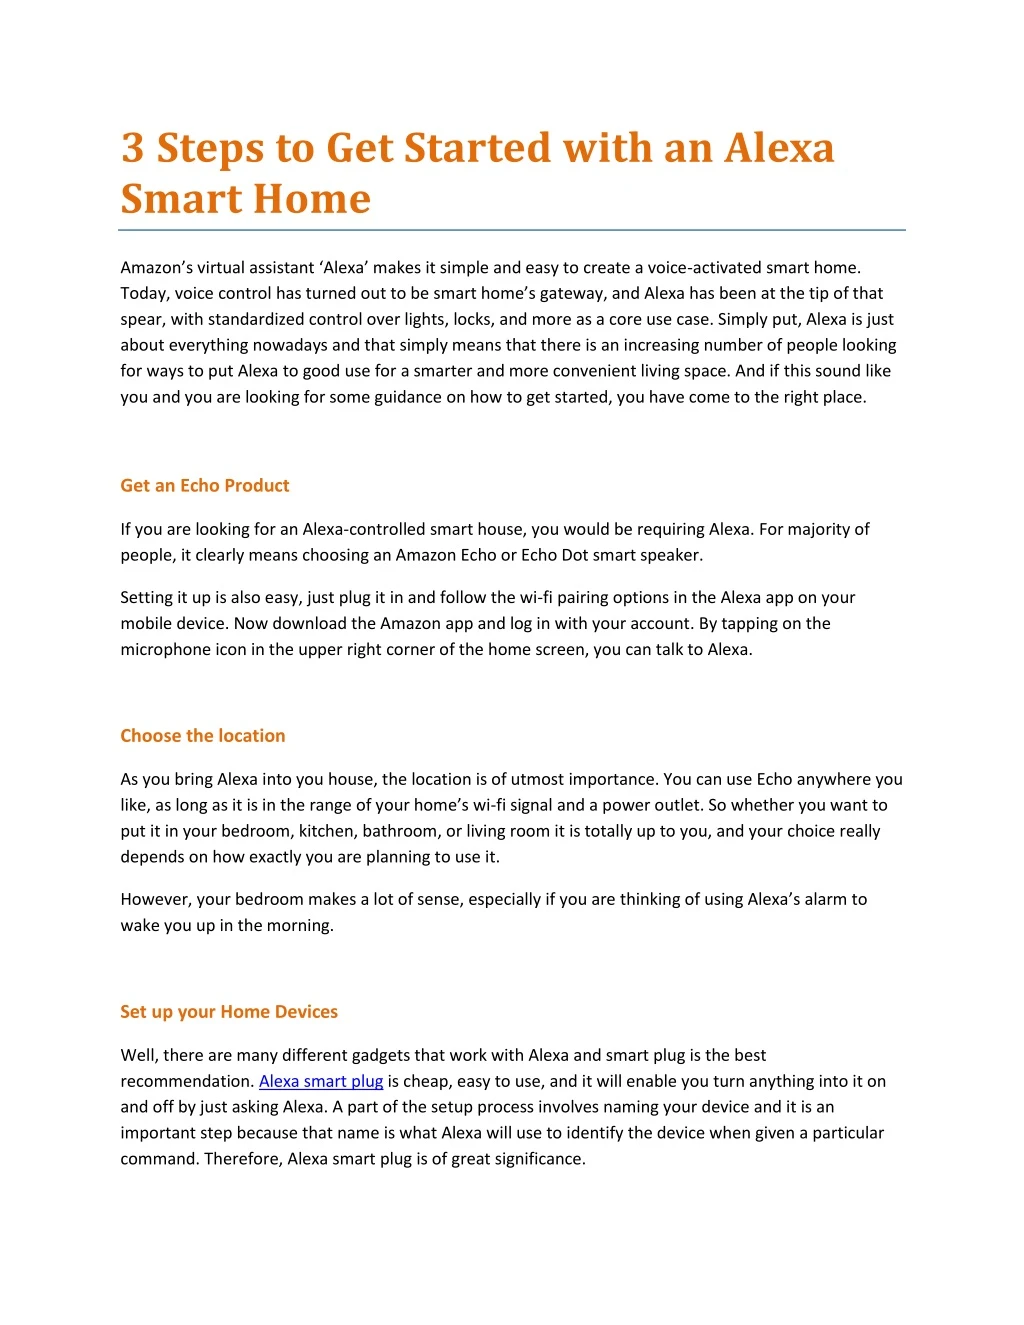 3 steps to get started with an alexa smart home